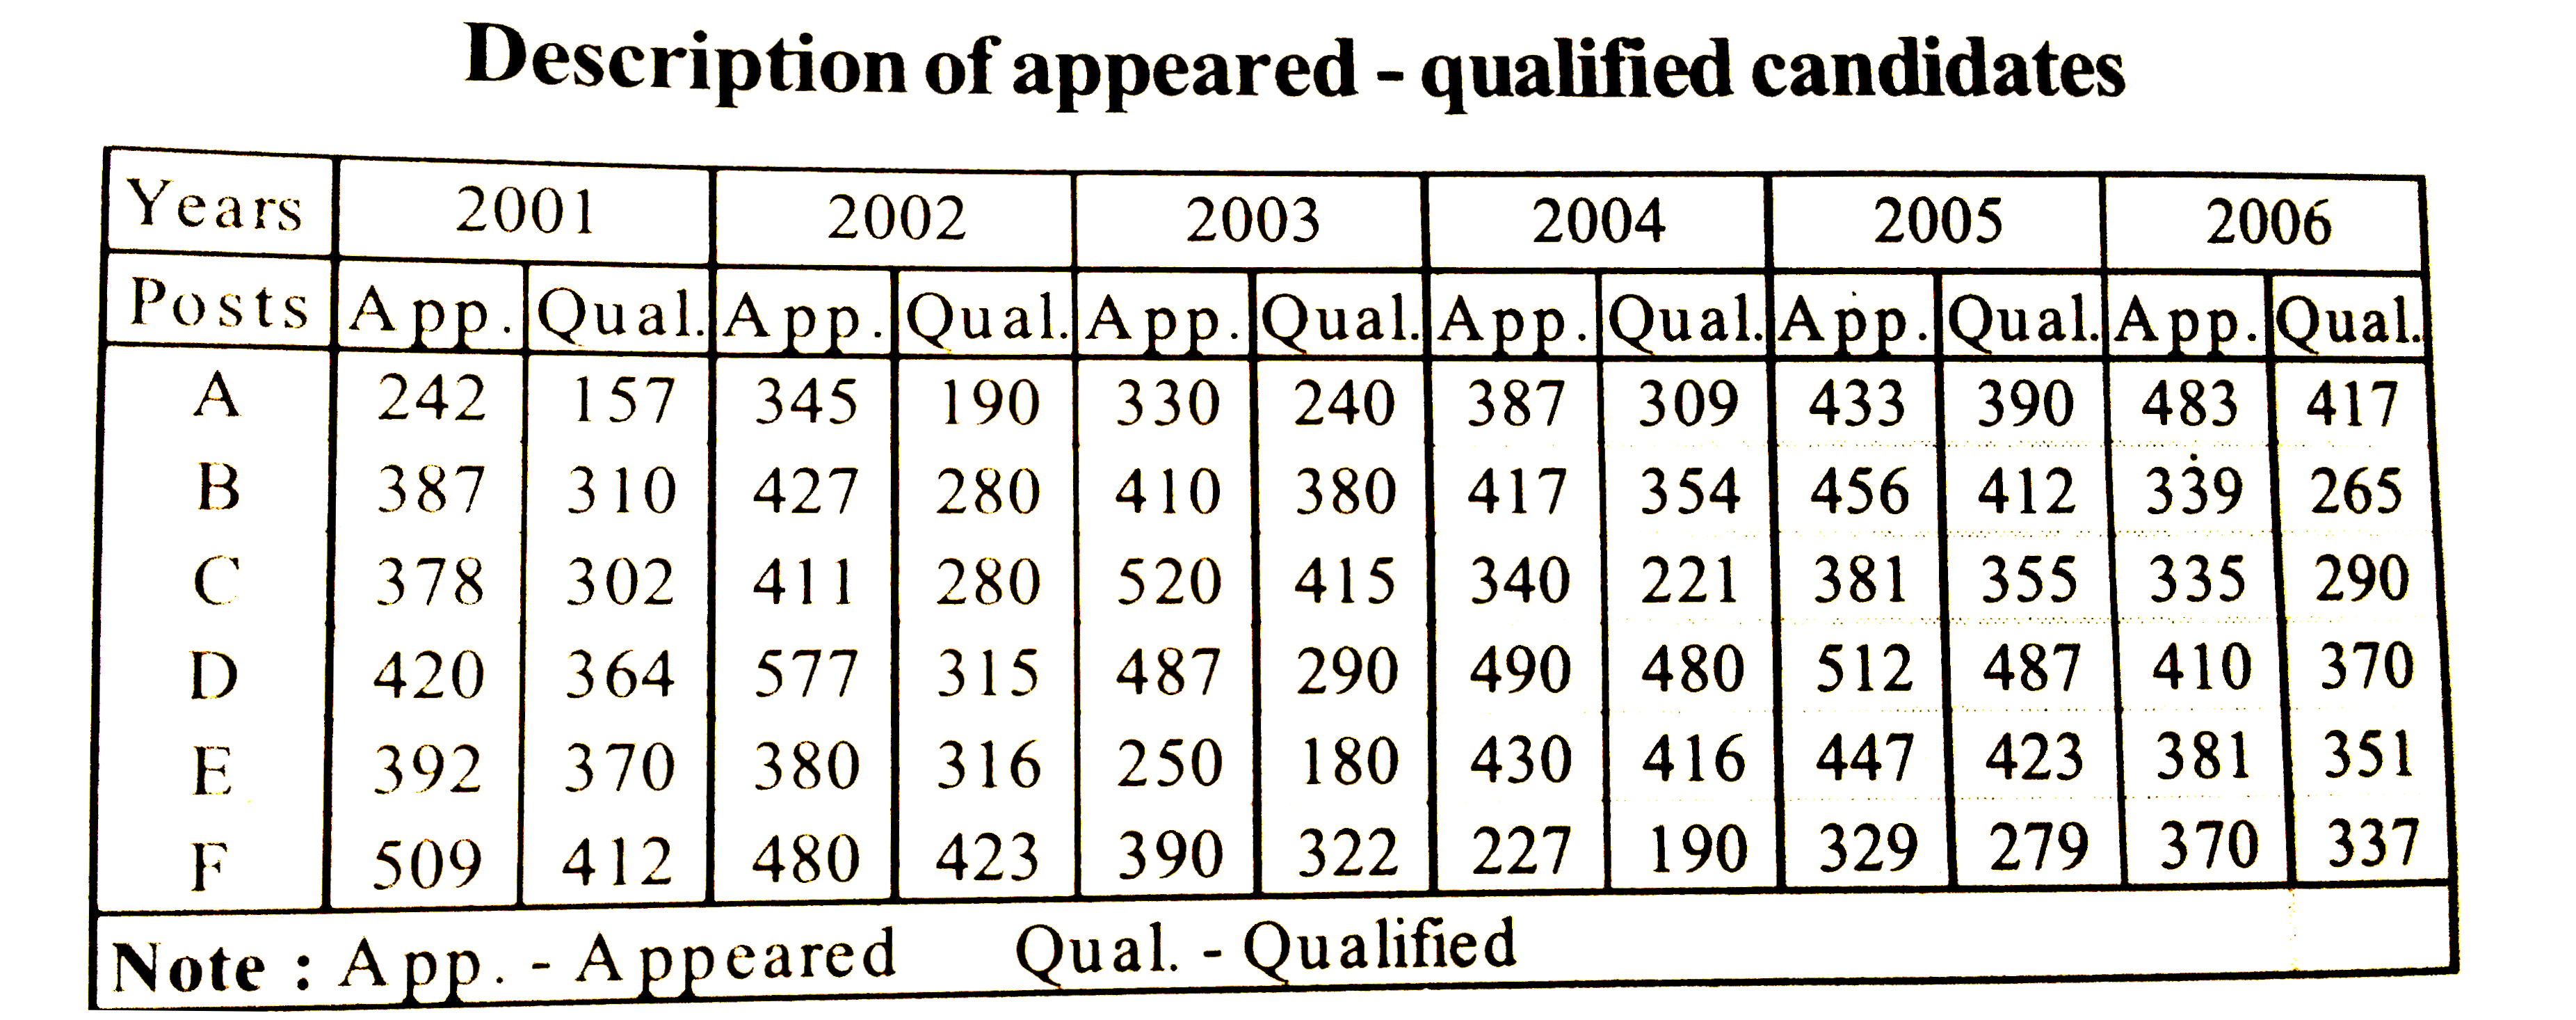 The respective ratio  between the number of candidates who qaulified for the posts of A and D in the year 2002 is